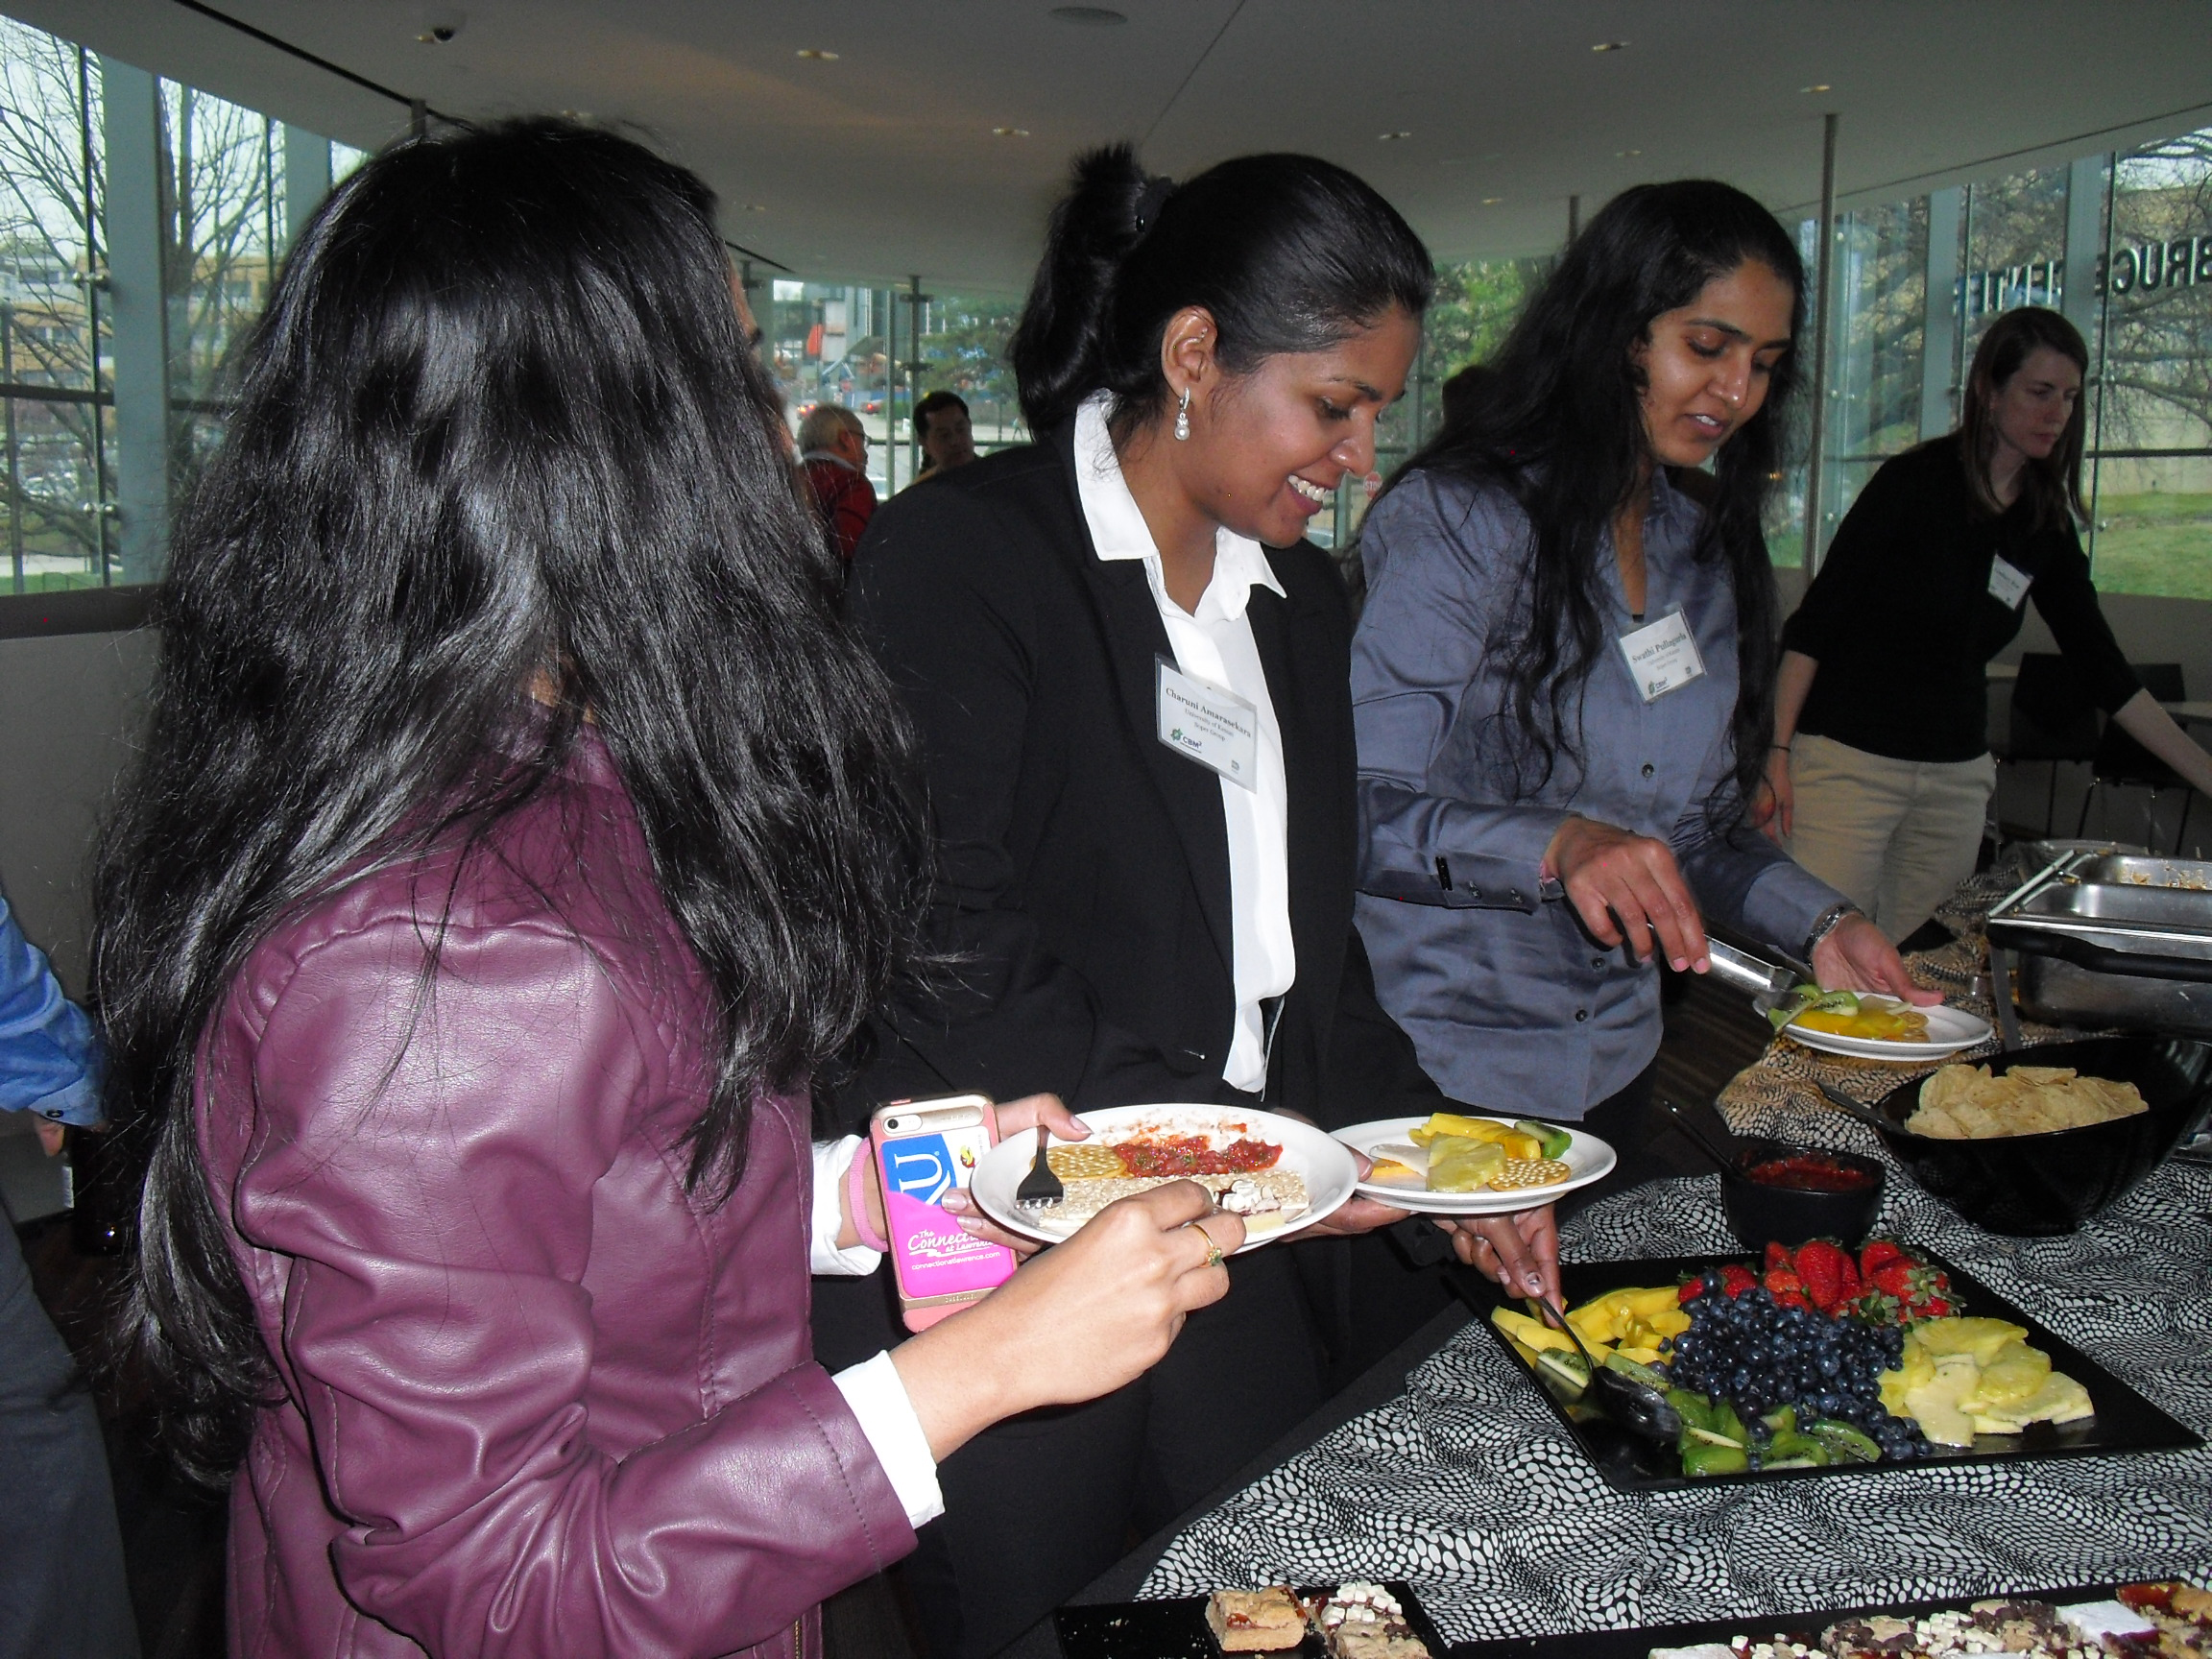 Four people standing in line to receive food at a convention service table.